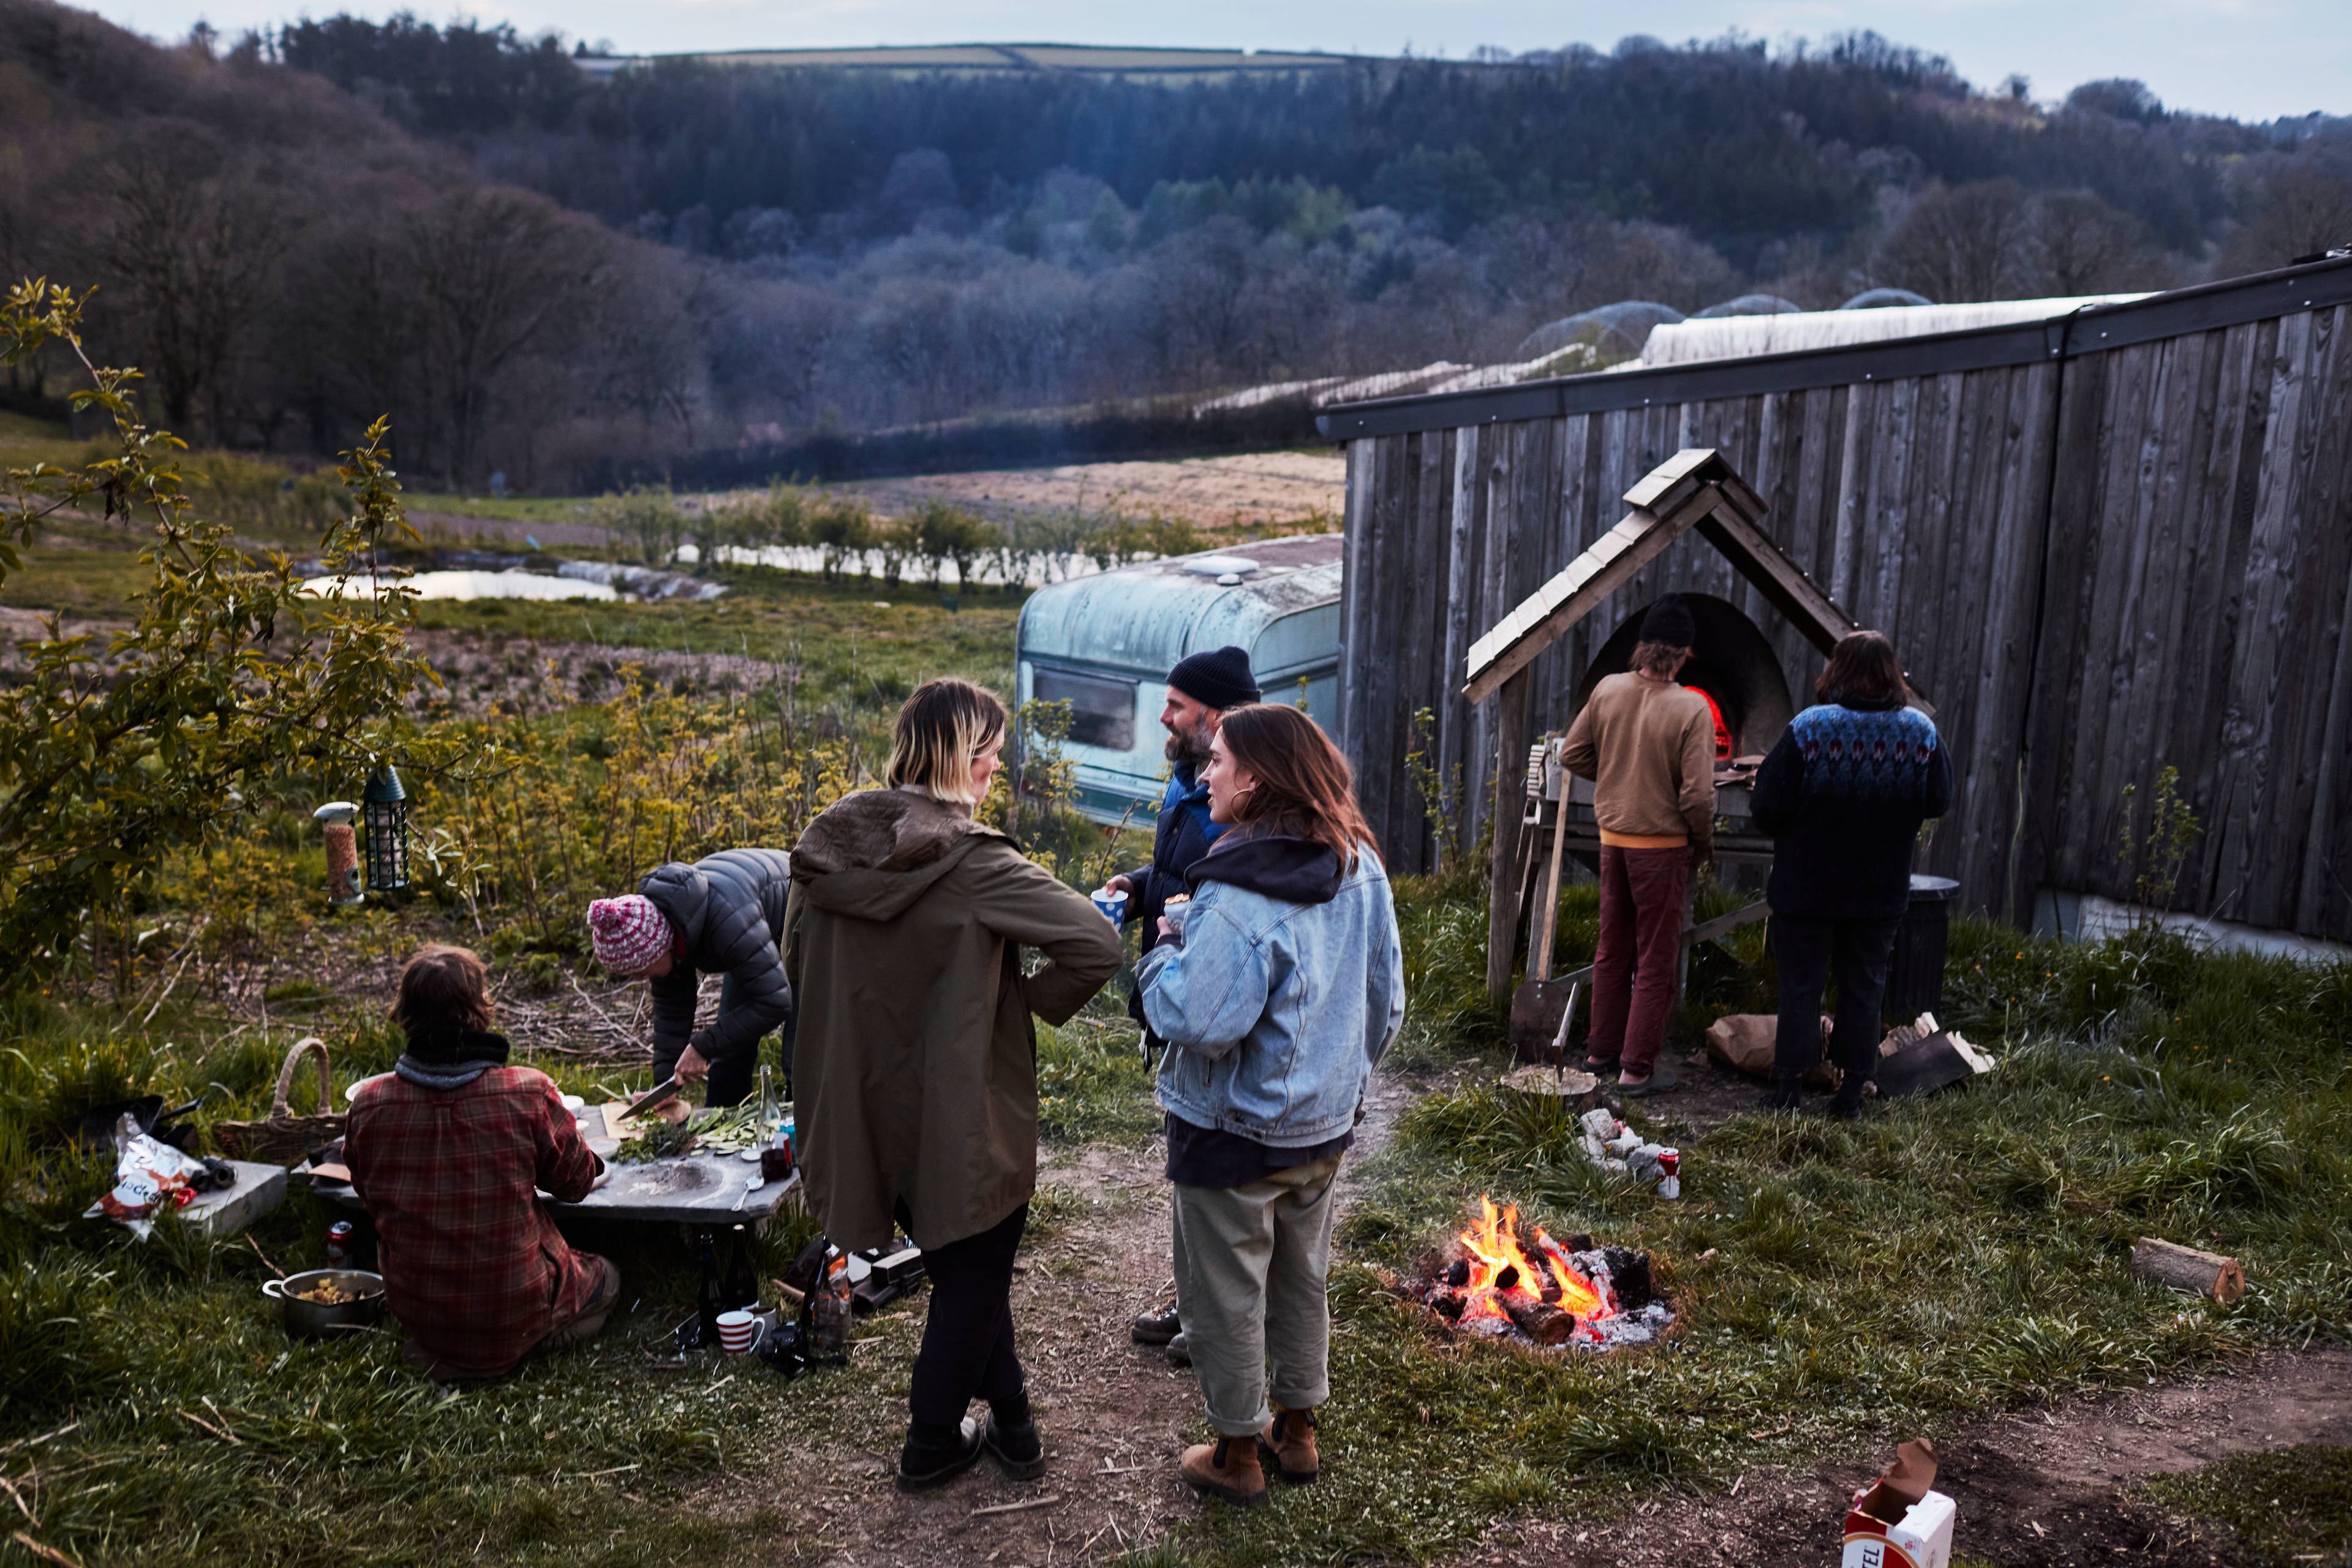 Group of people cooking and talking around the fire on a farm